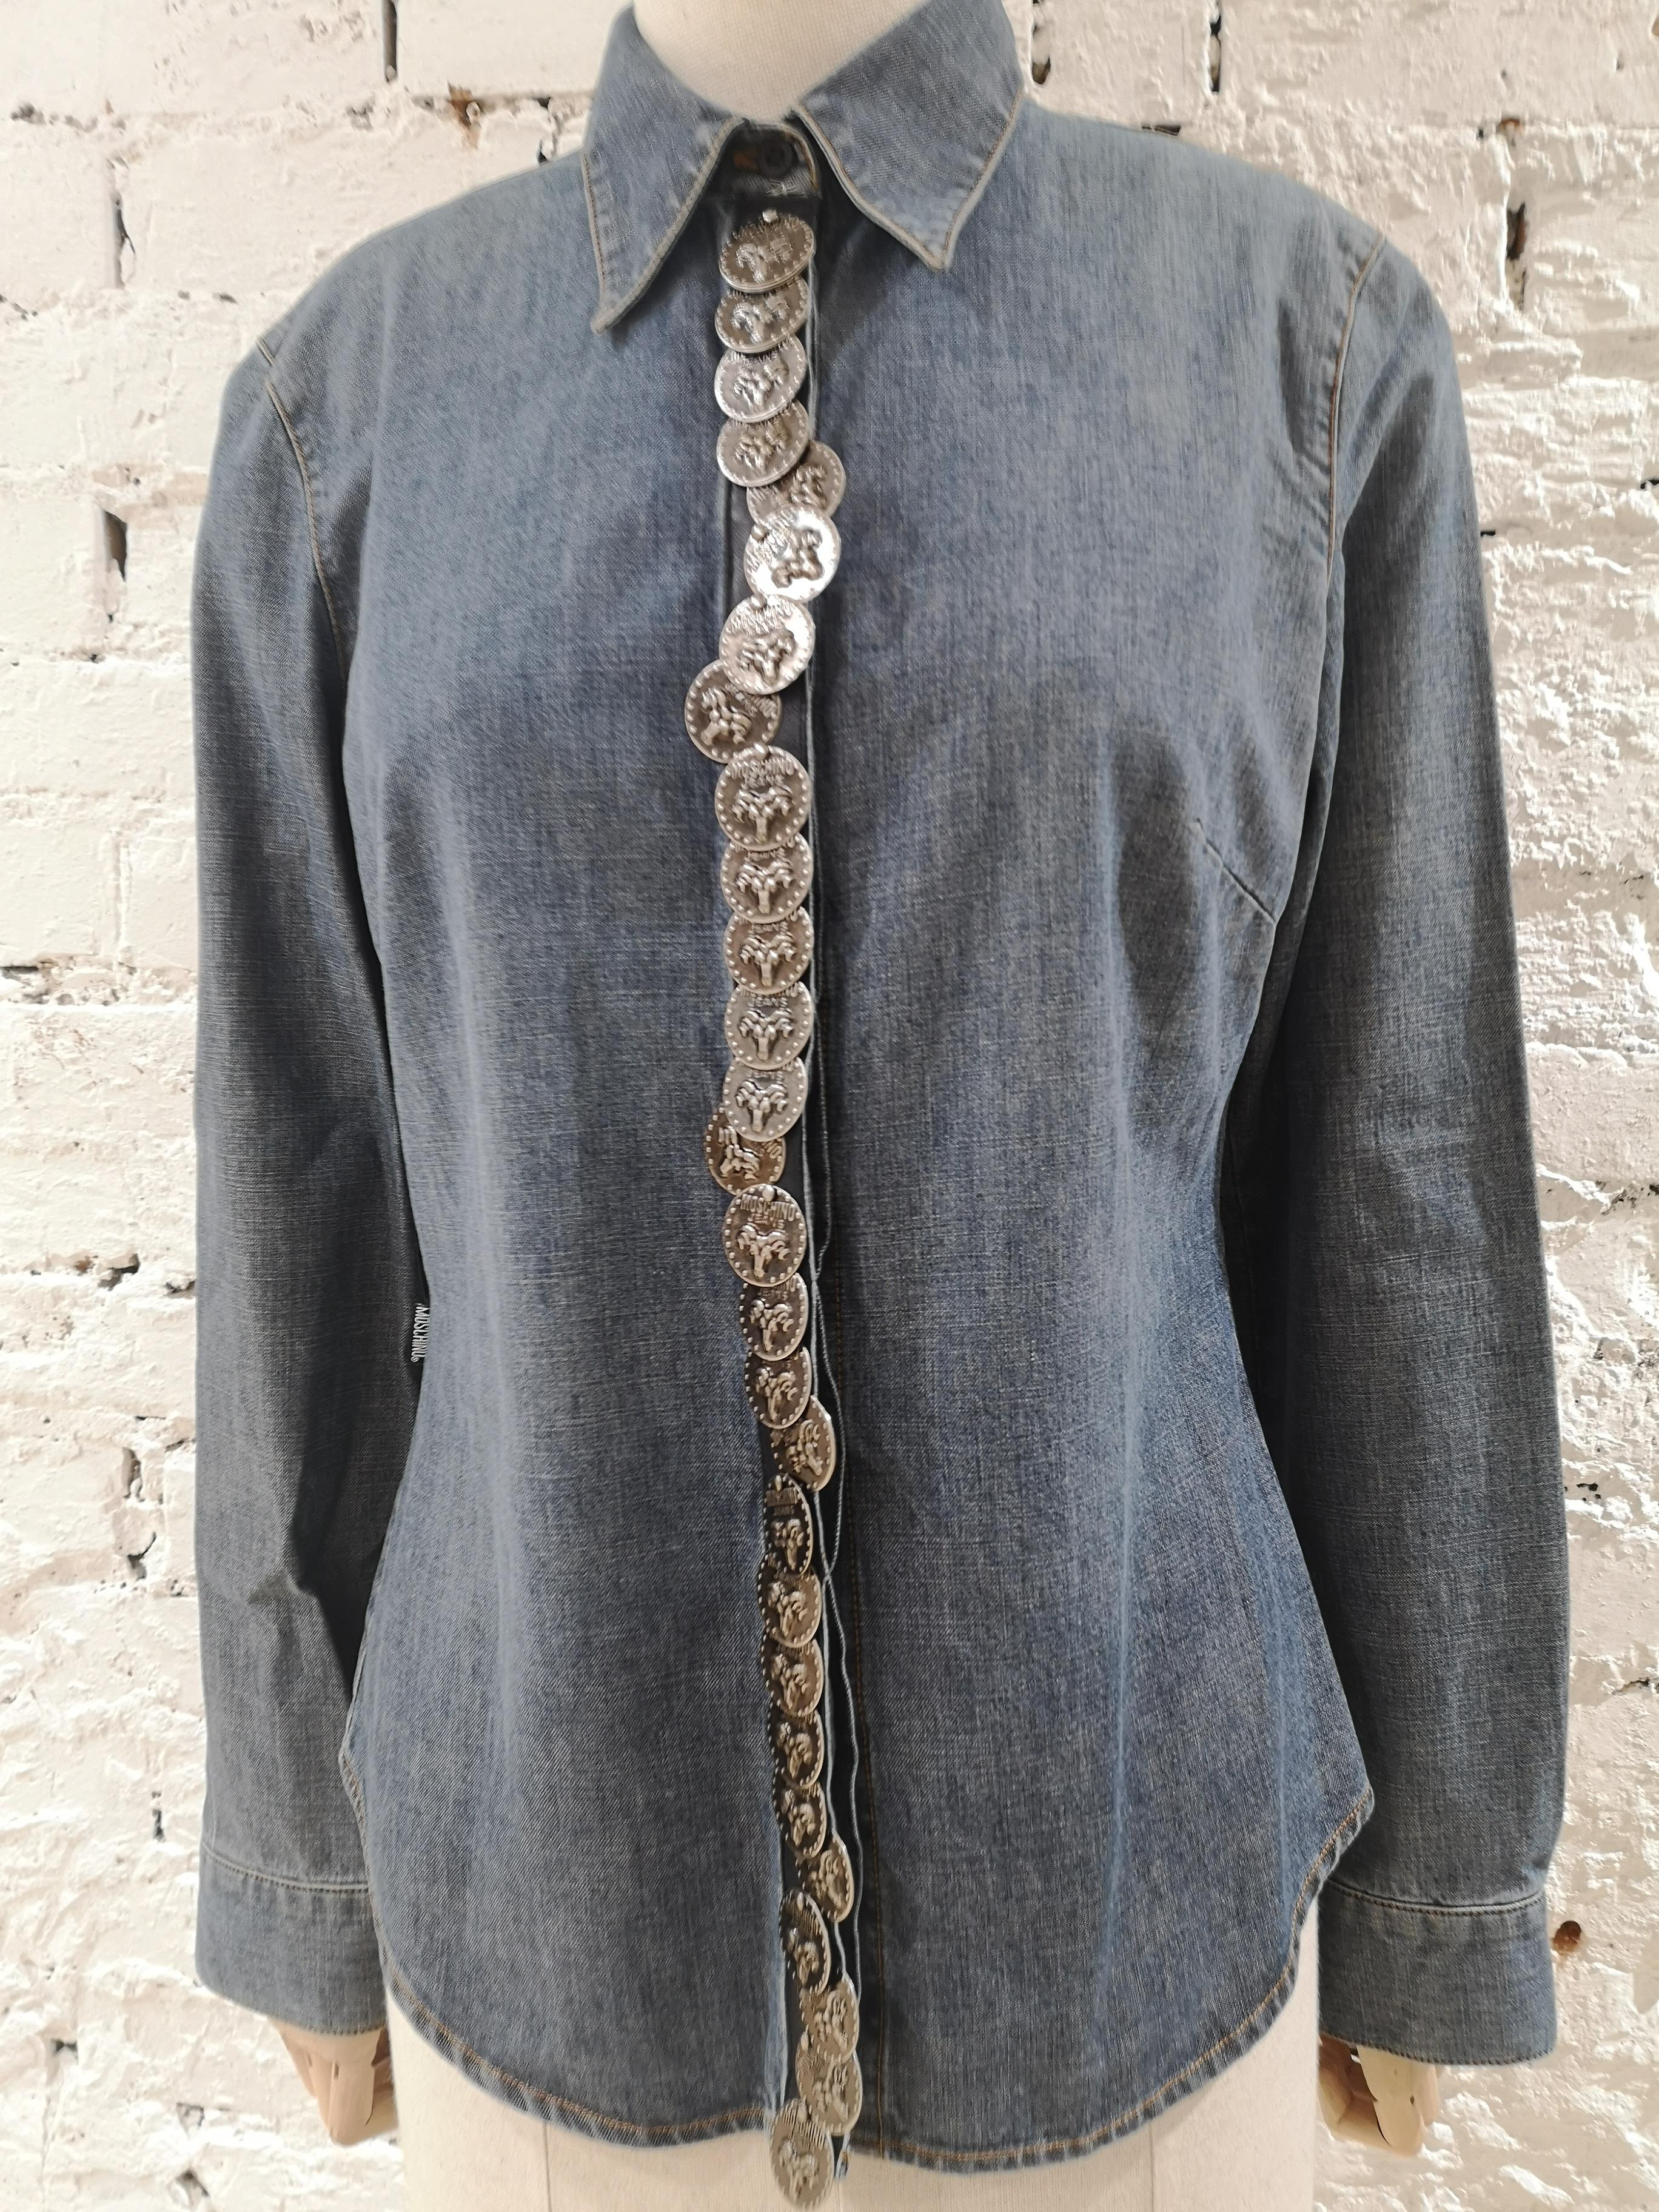 Moschino Denim Shirt
Moschino Denim shirt embellished with coins on the front
totally made in italy in size 42
